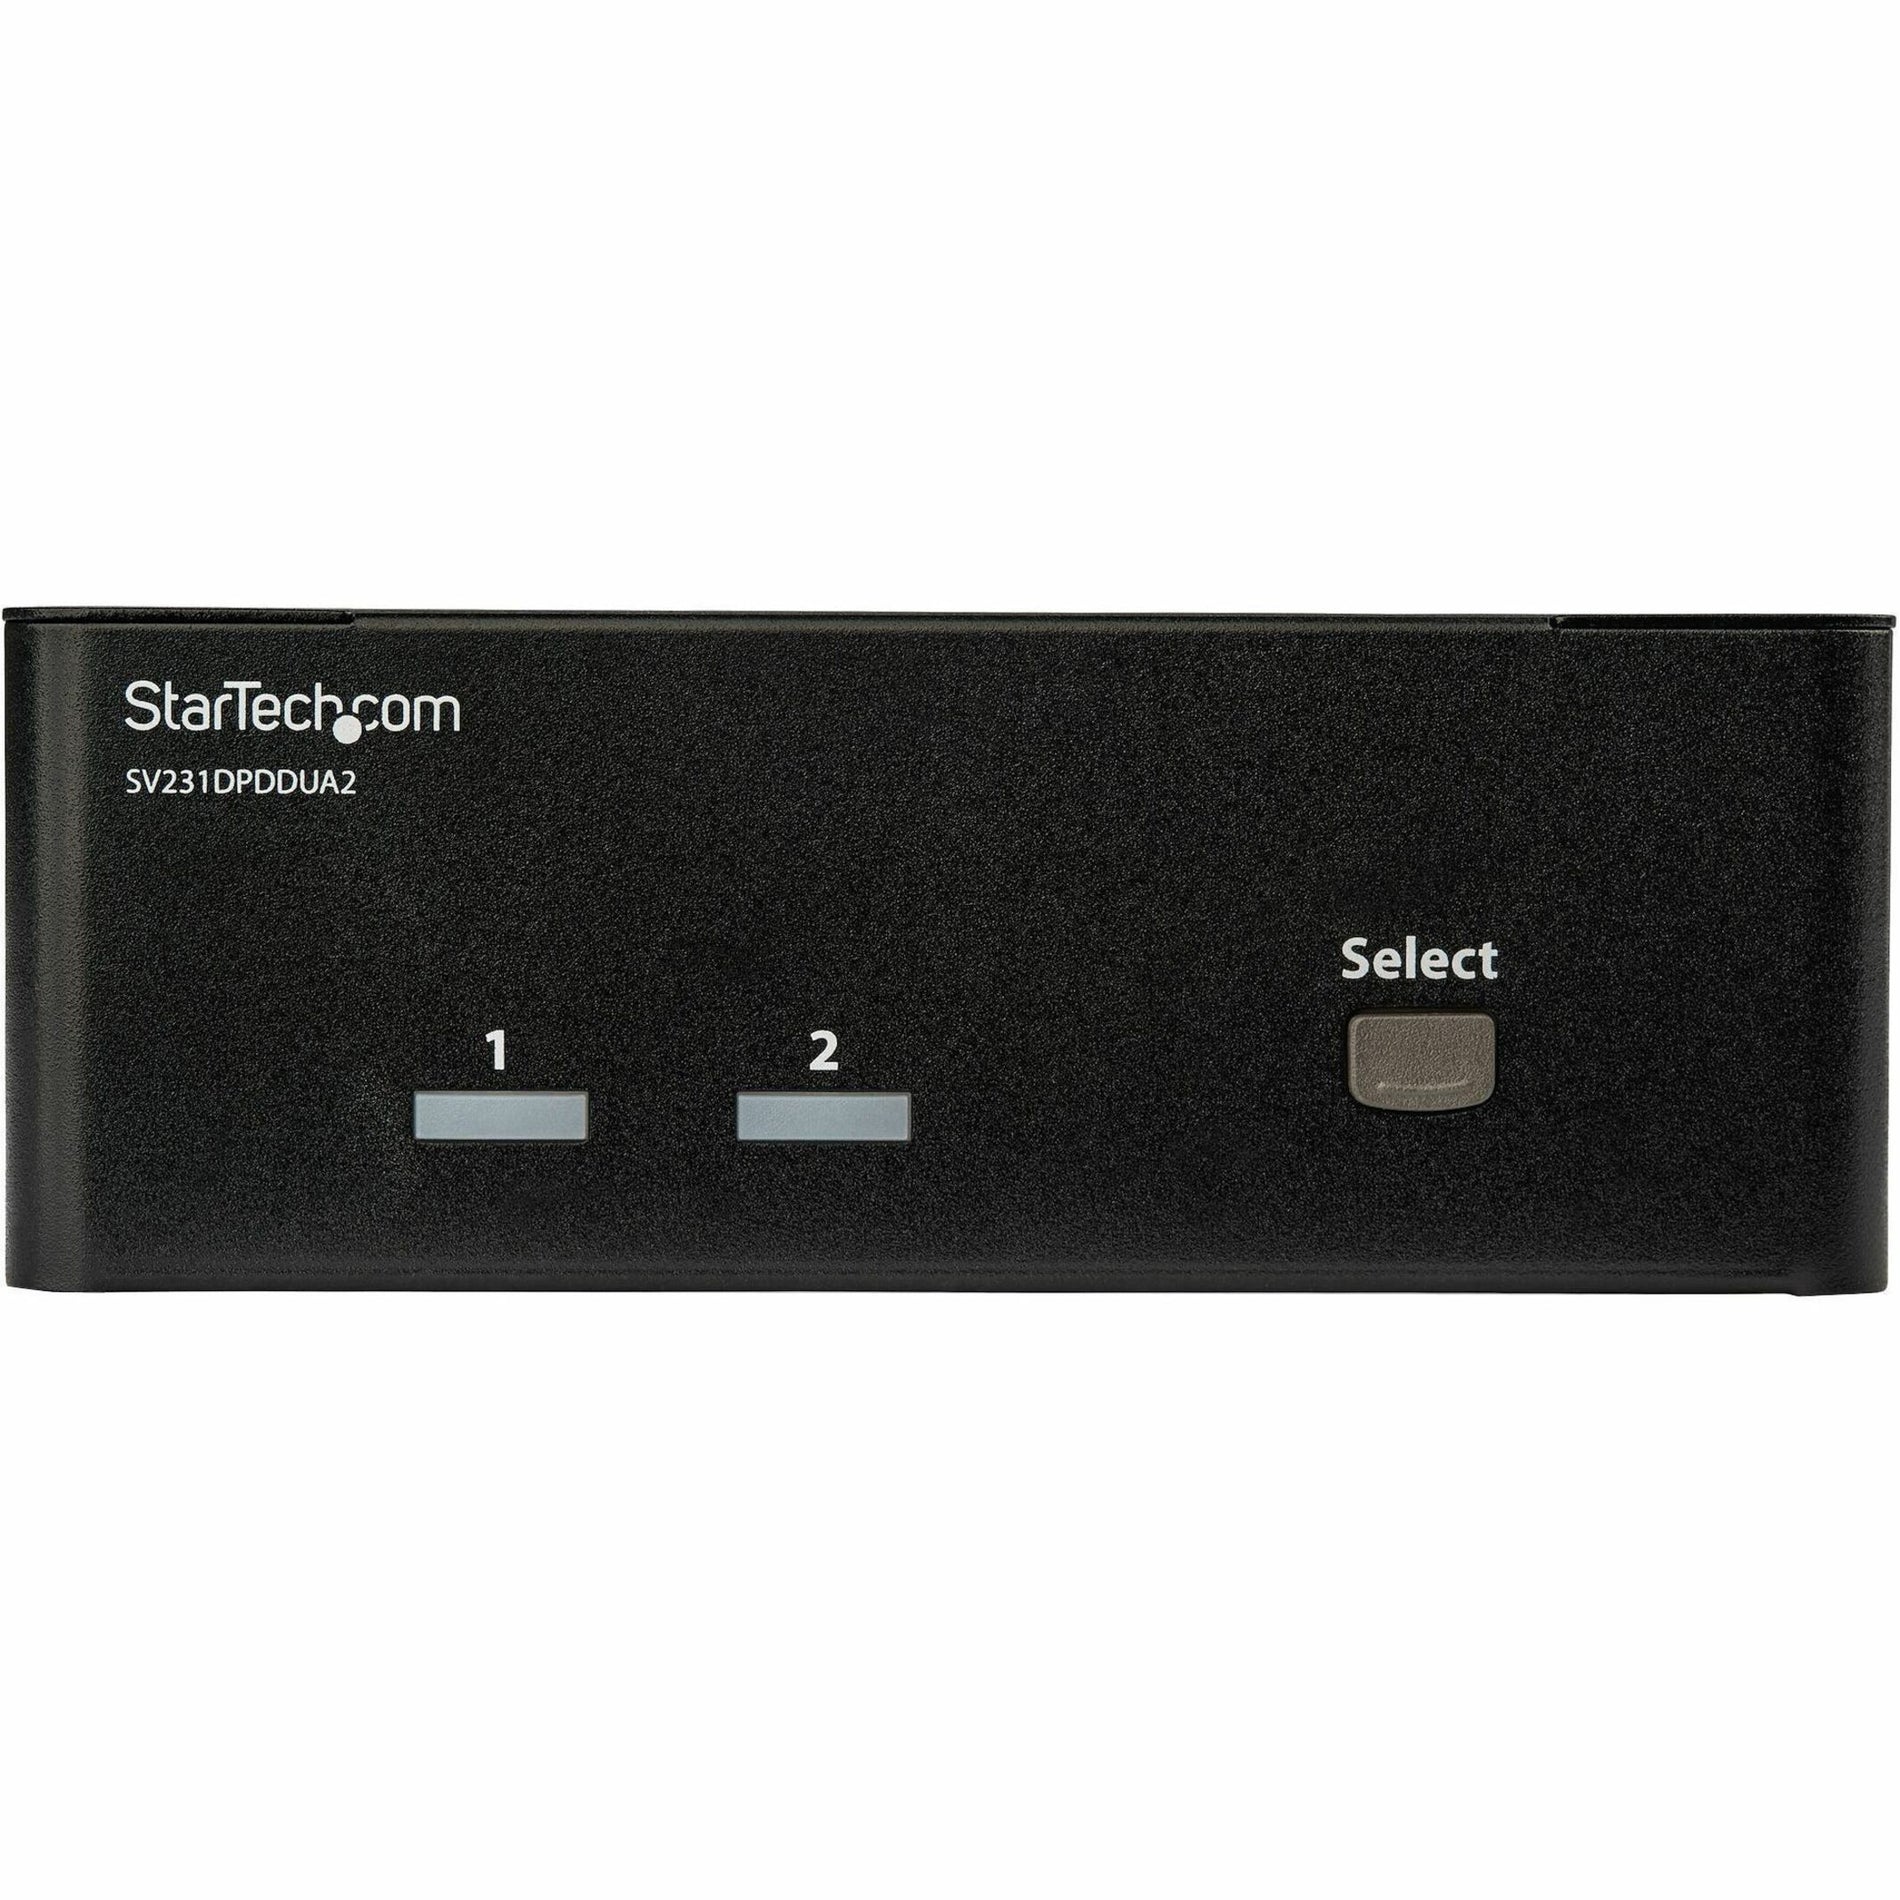 StarTech.com SV231DPDDUA2 2-Port DisplayPort Dual-Monitor KVM Switch - 4K 60Hz, Access two dual-monitor computers and two shared USB peripherals